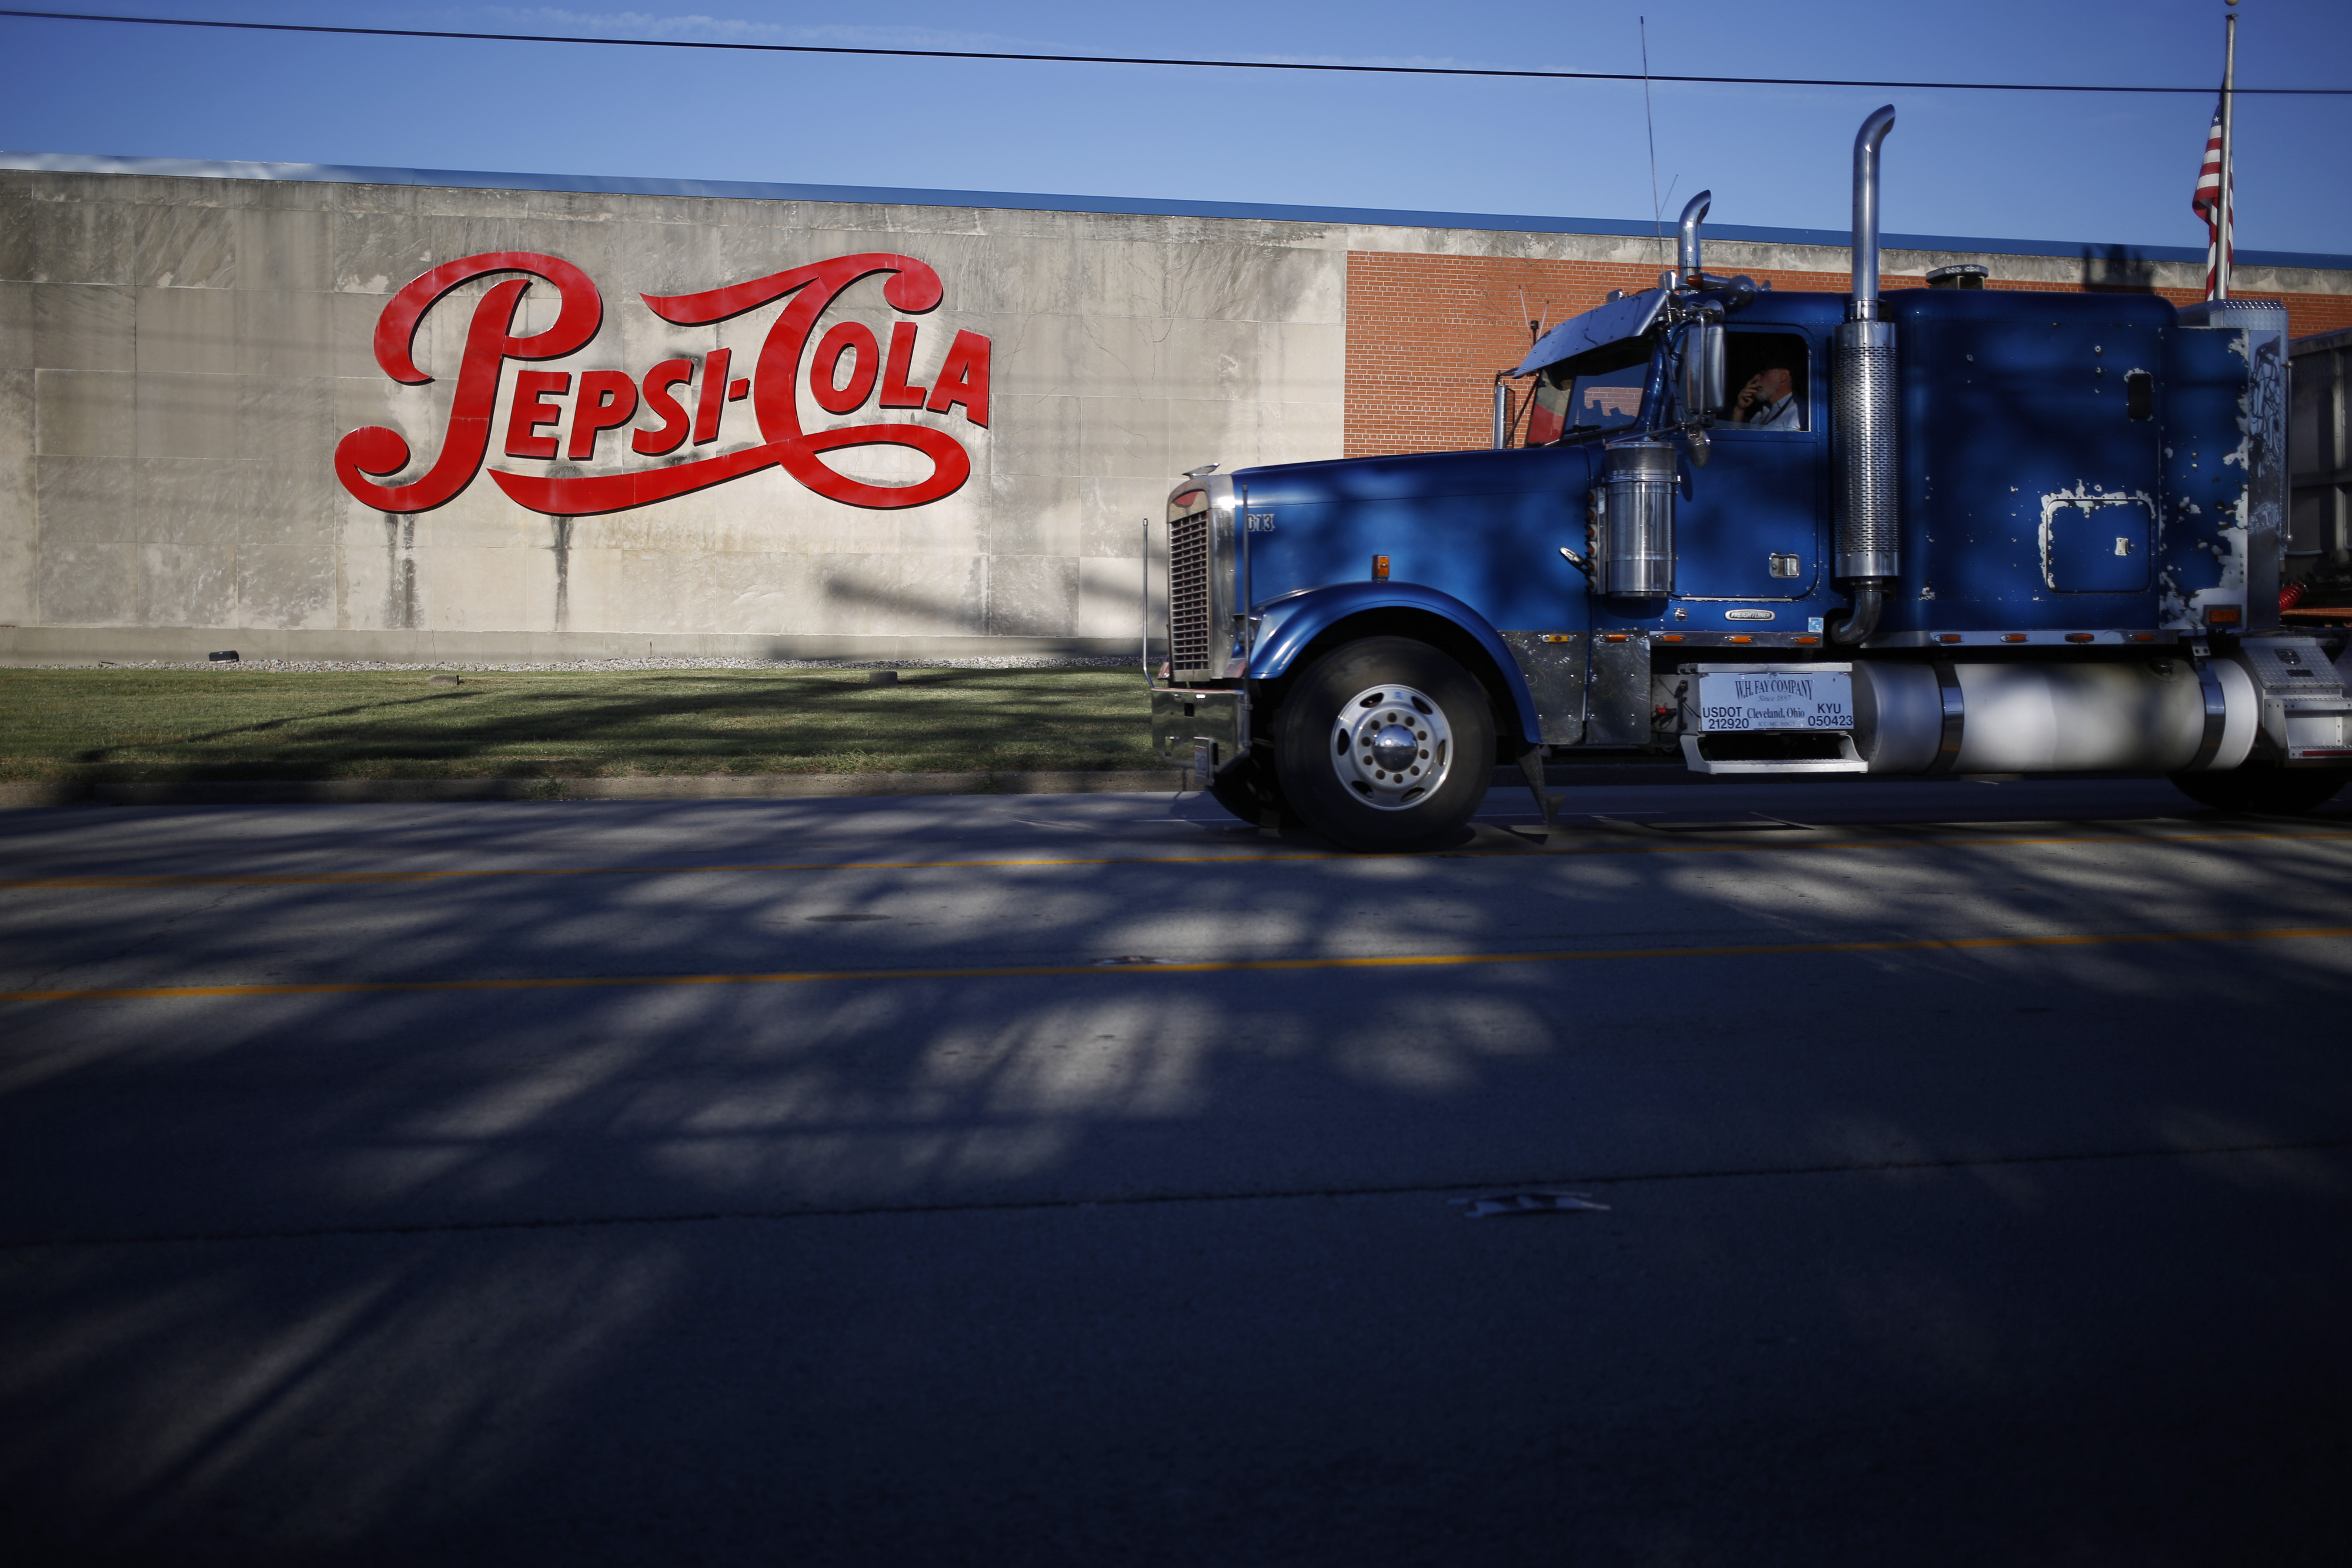 A truck passes in front of a PepsiCo Inc. facility in Louisville, Kentucky, U.S., on Tuesday, Sept. 24, 2019. PepsiCo Inc. is scheduled to release earnings figures on October 3. Photographer: